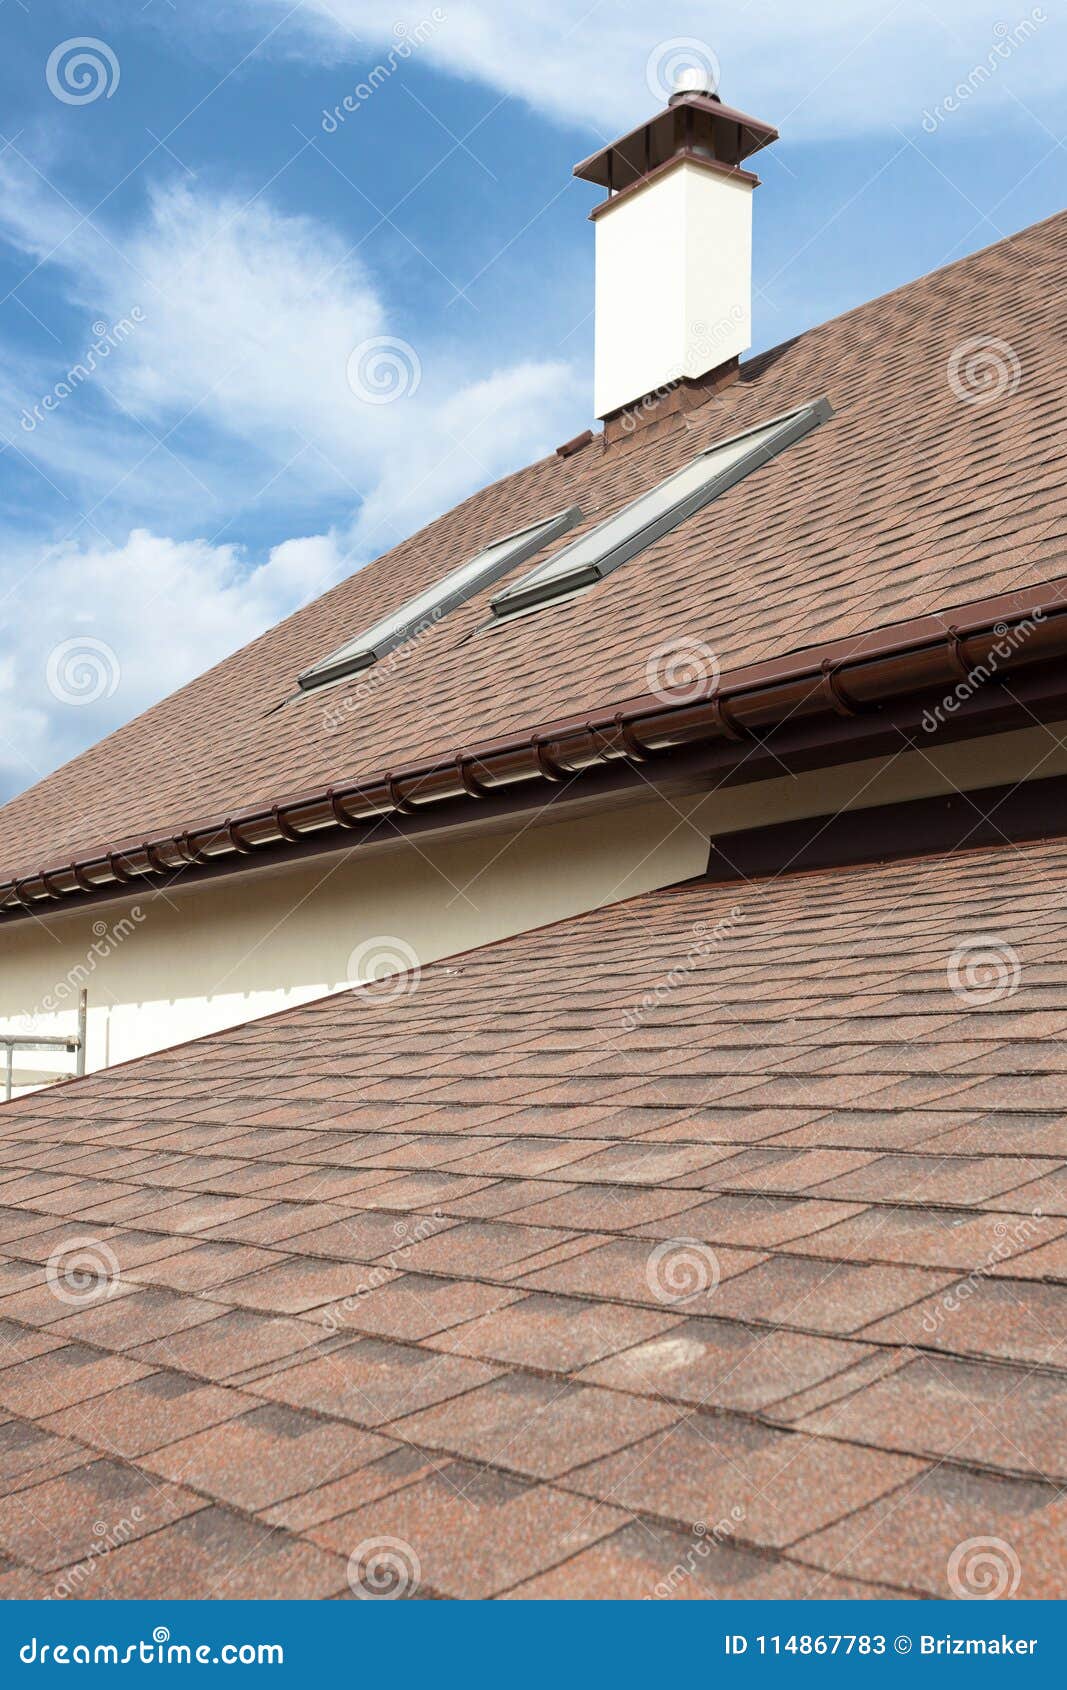 Roofing Construction And Building New House With Modular Chimney, Skylights, Attic, Dormers And